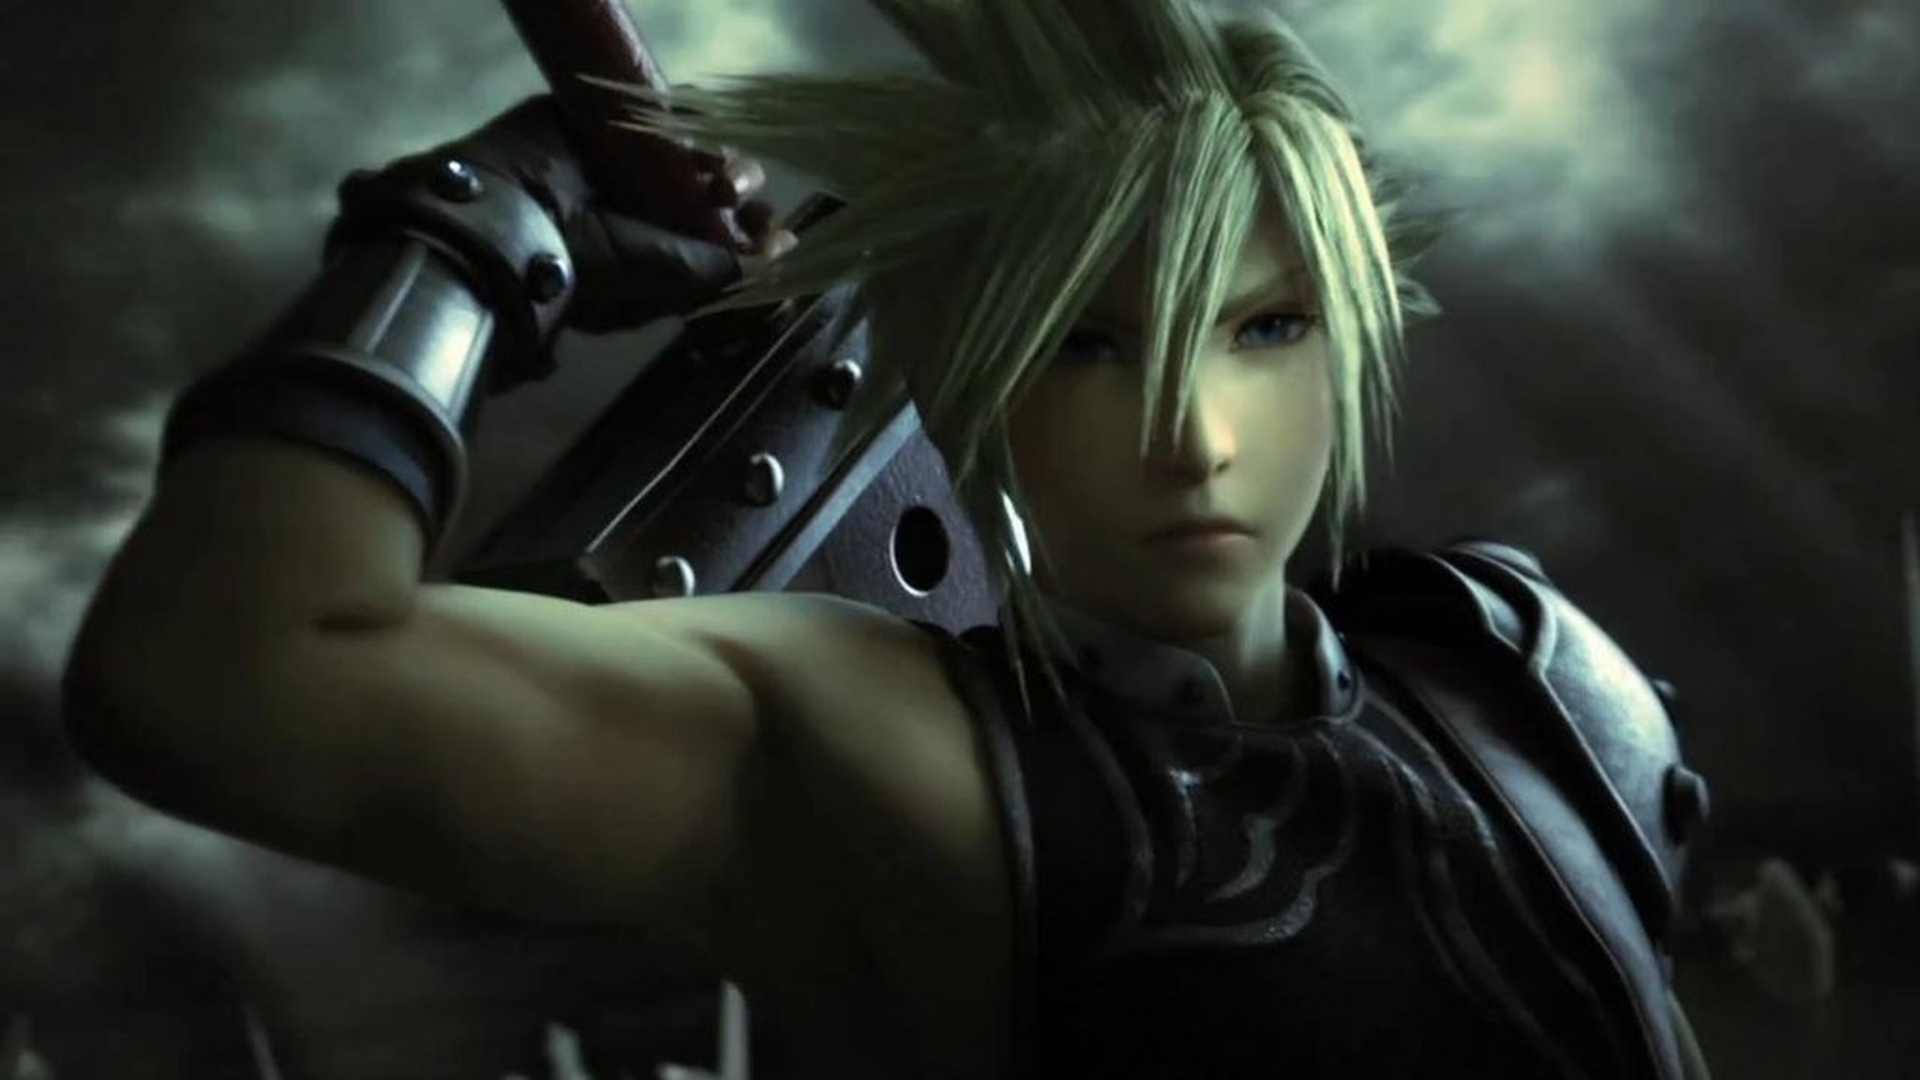 Cloud Strife from Dissidia 012: Final Fantasy - a video game character with a striking appearance.